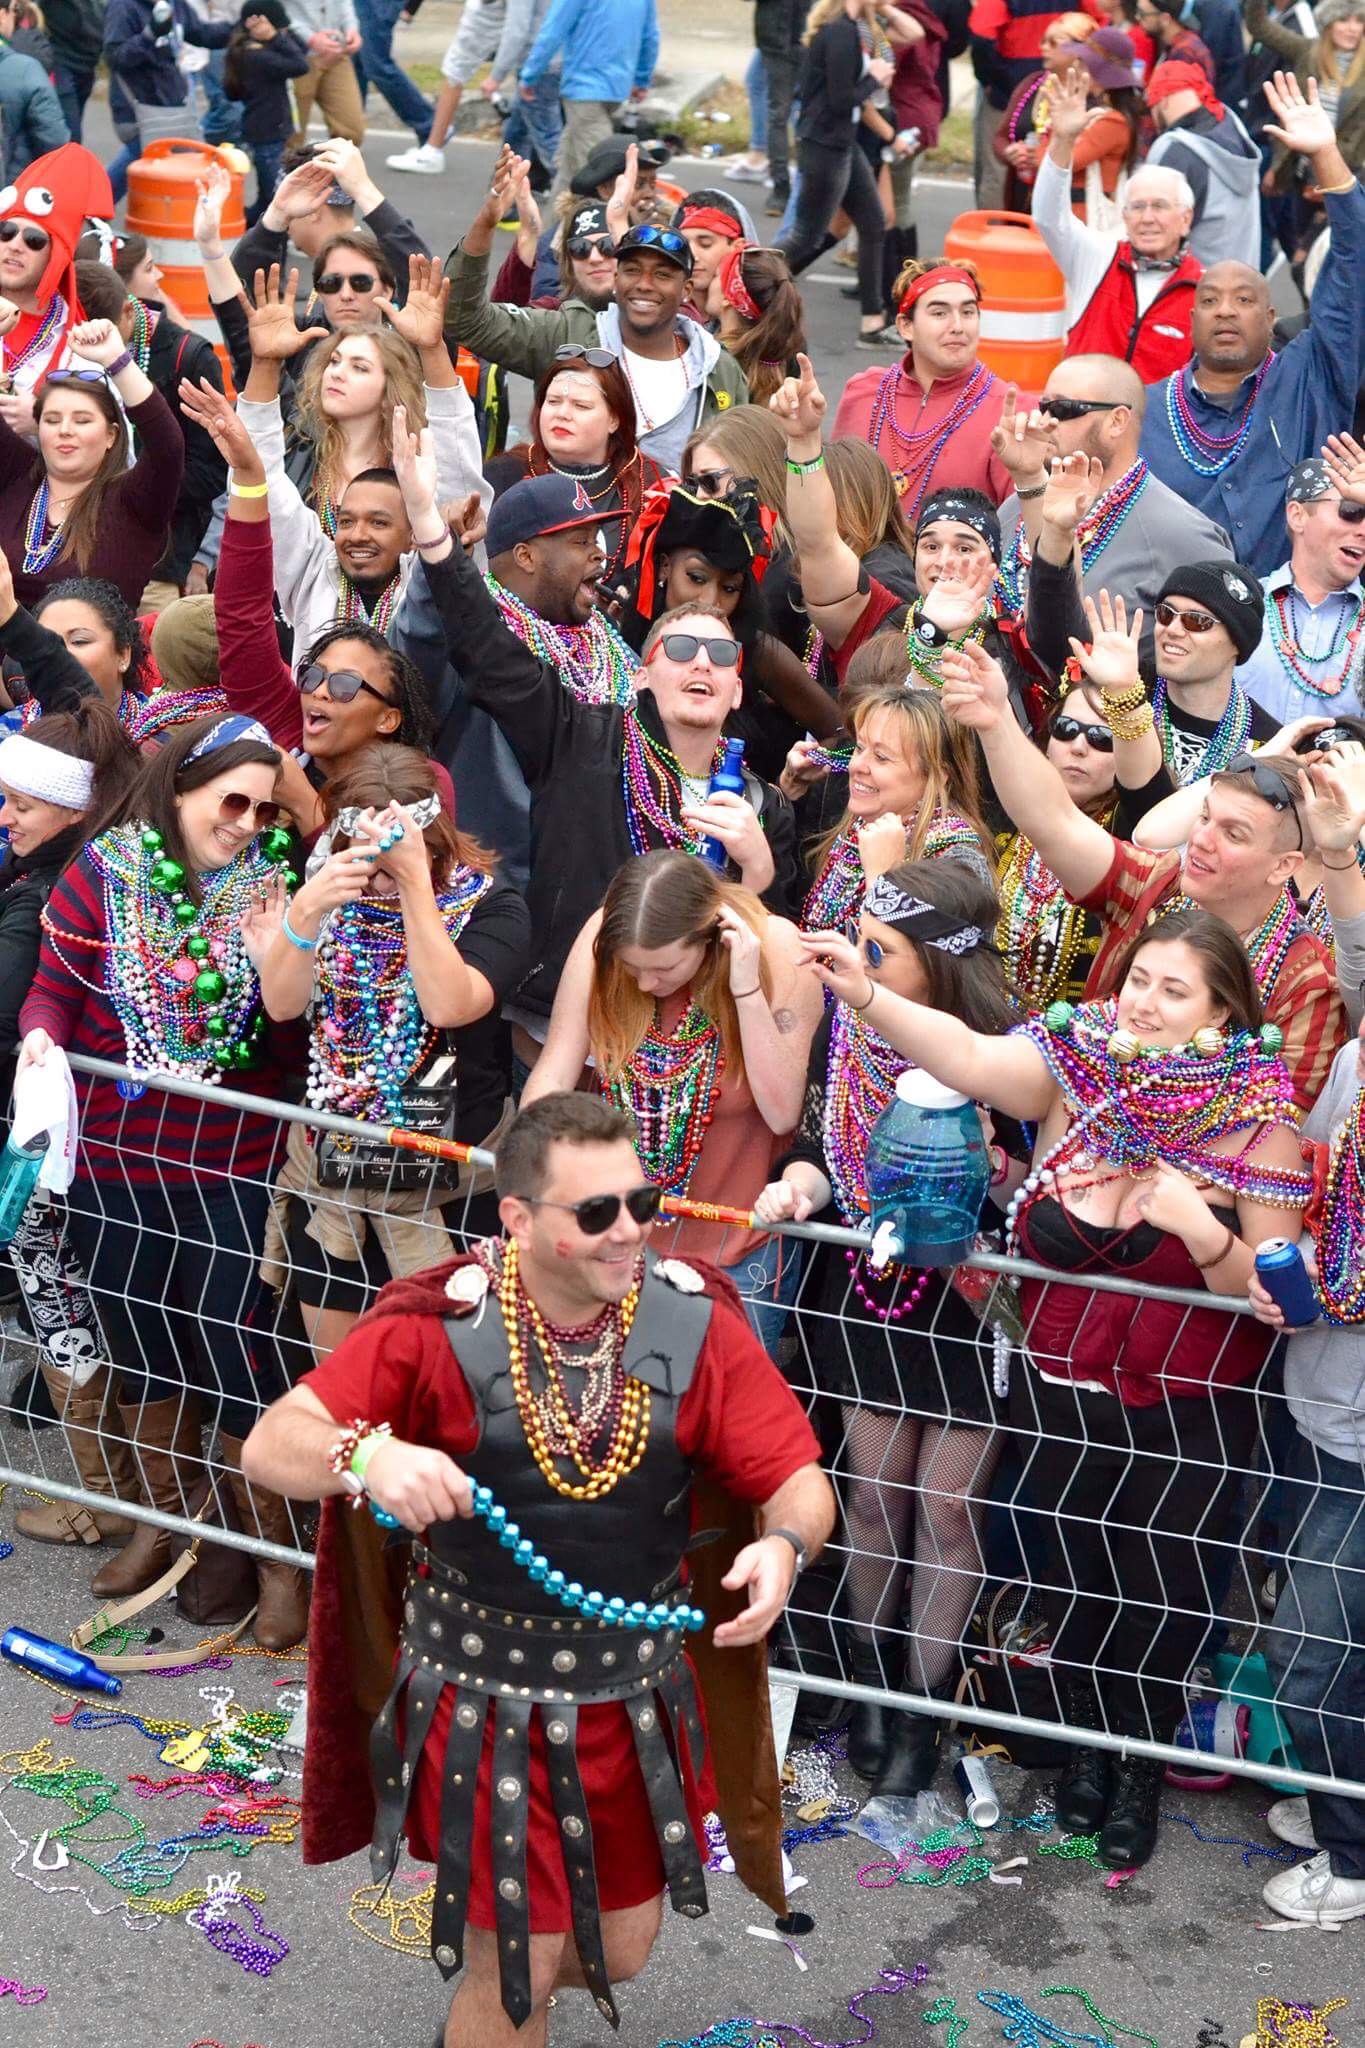 Pirate Party: Parade attendees enjoy themselves at Gasparilla on Saturday.